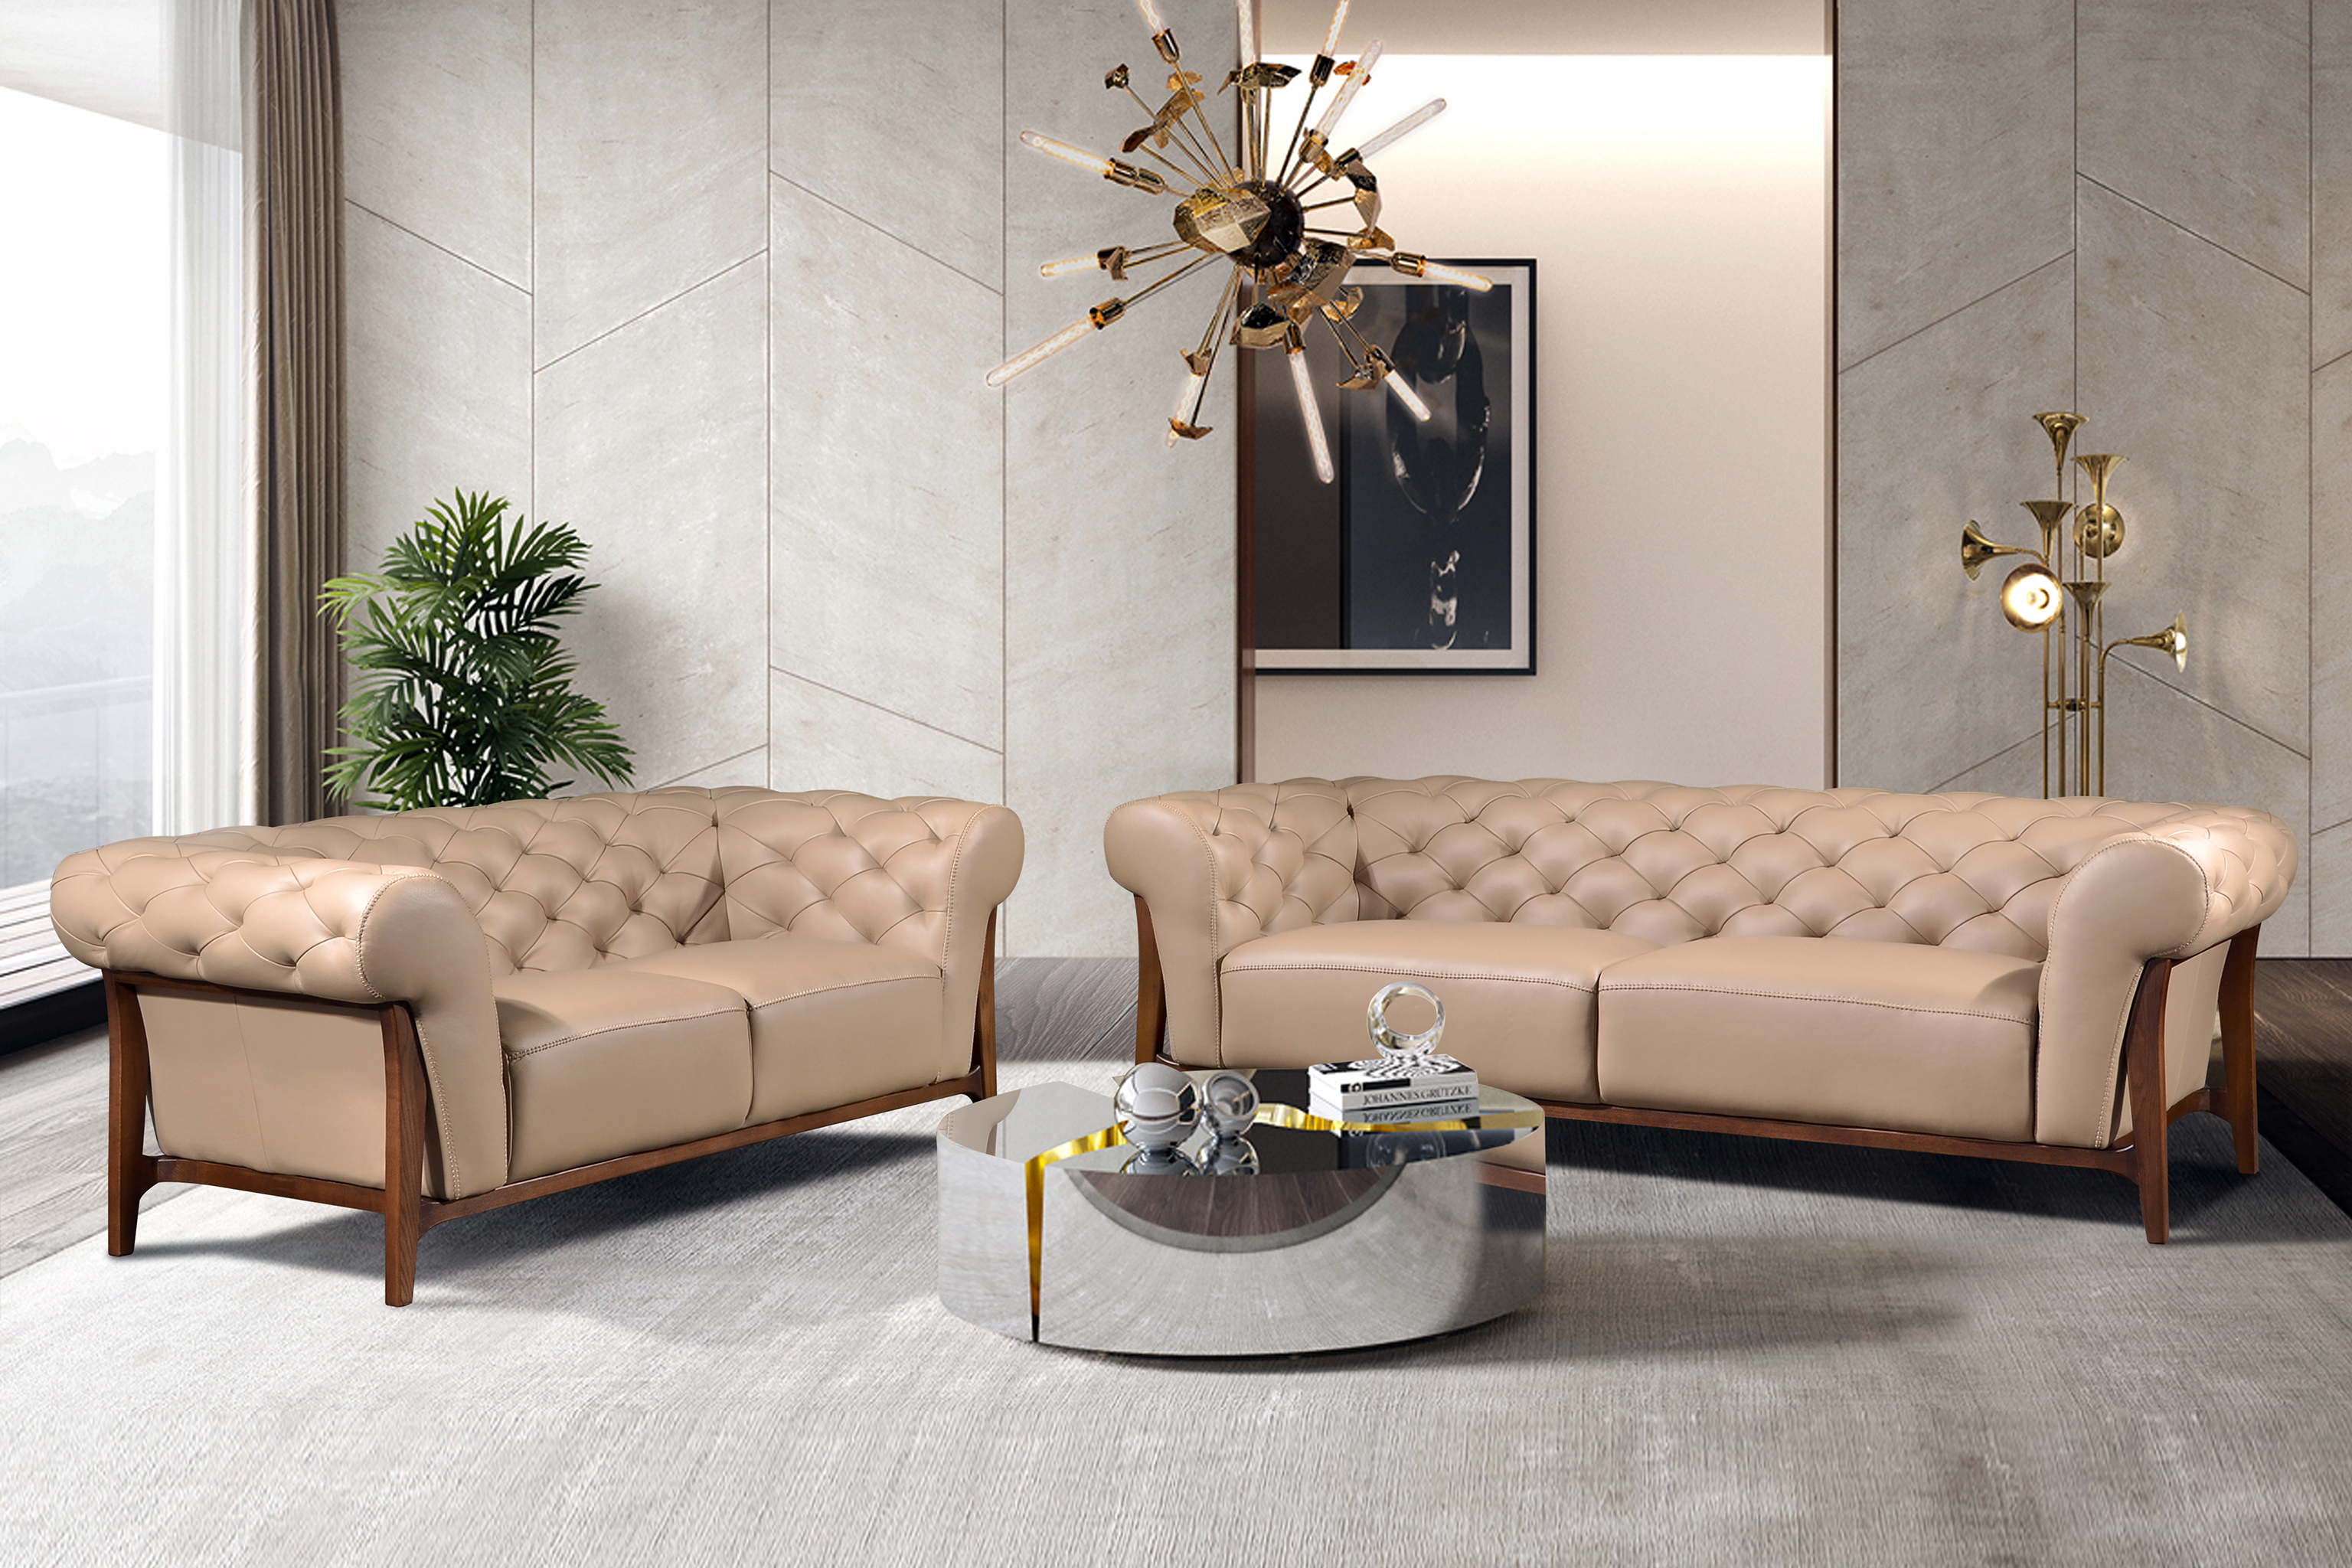 VINCENZO 2 Seater Sofa In Leather By Castilla